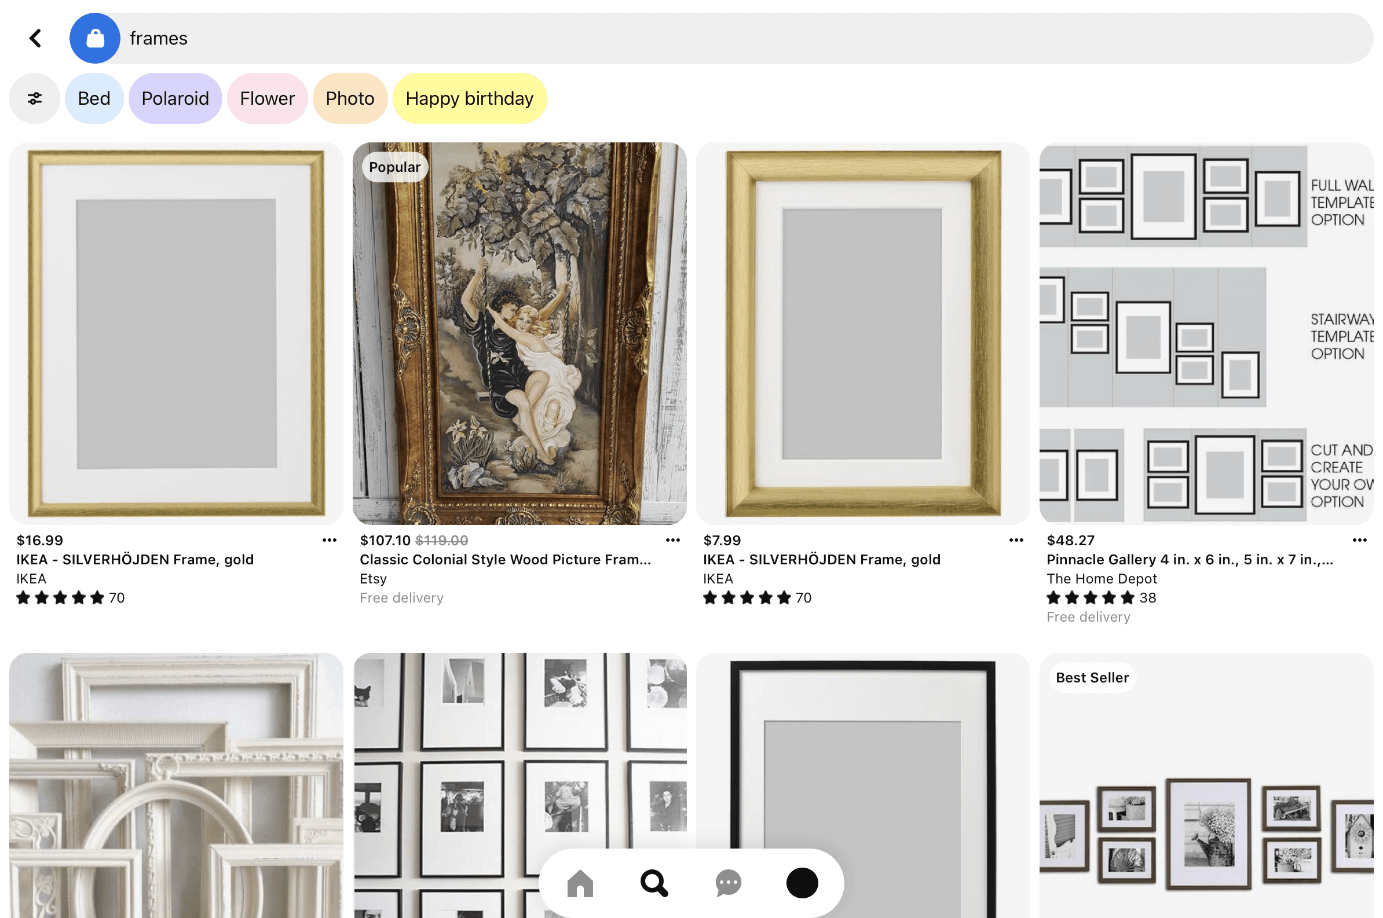 iPad screenshot of a Pinterest search for frames